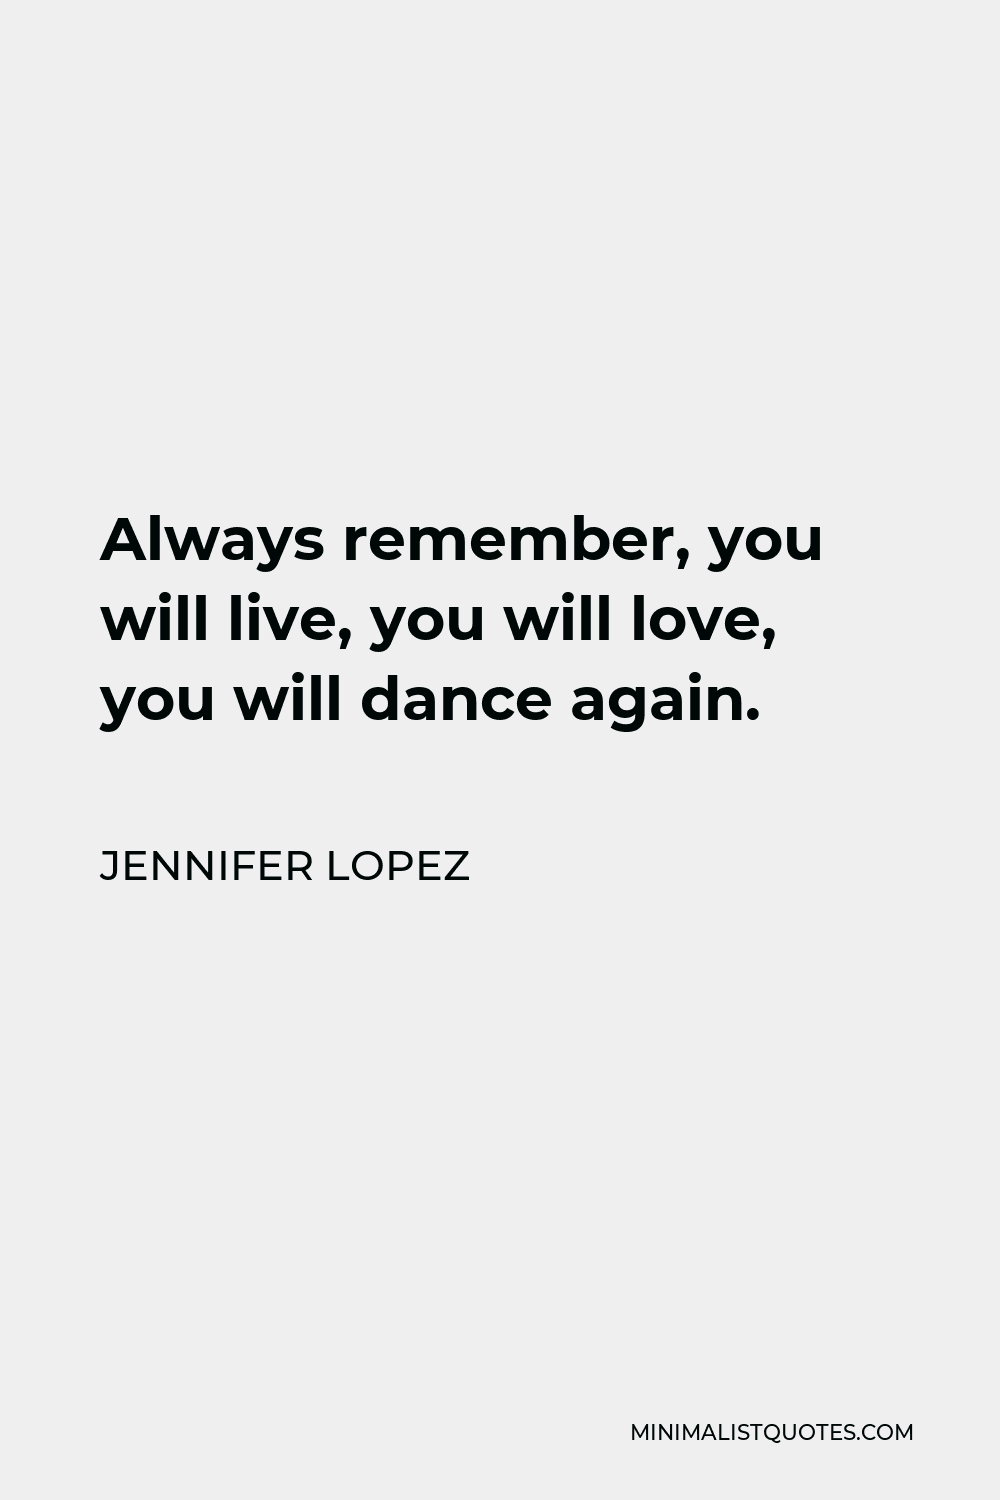 Jennifer Lopez Quote - Always remember, you will live, you will love, you will dance again.